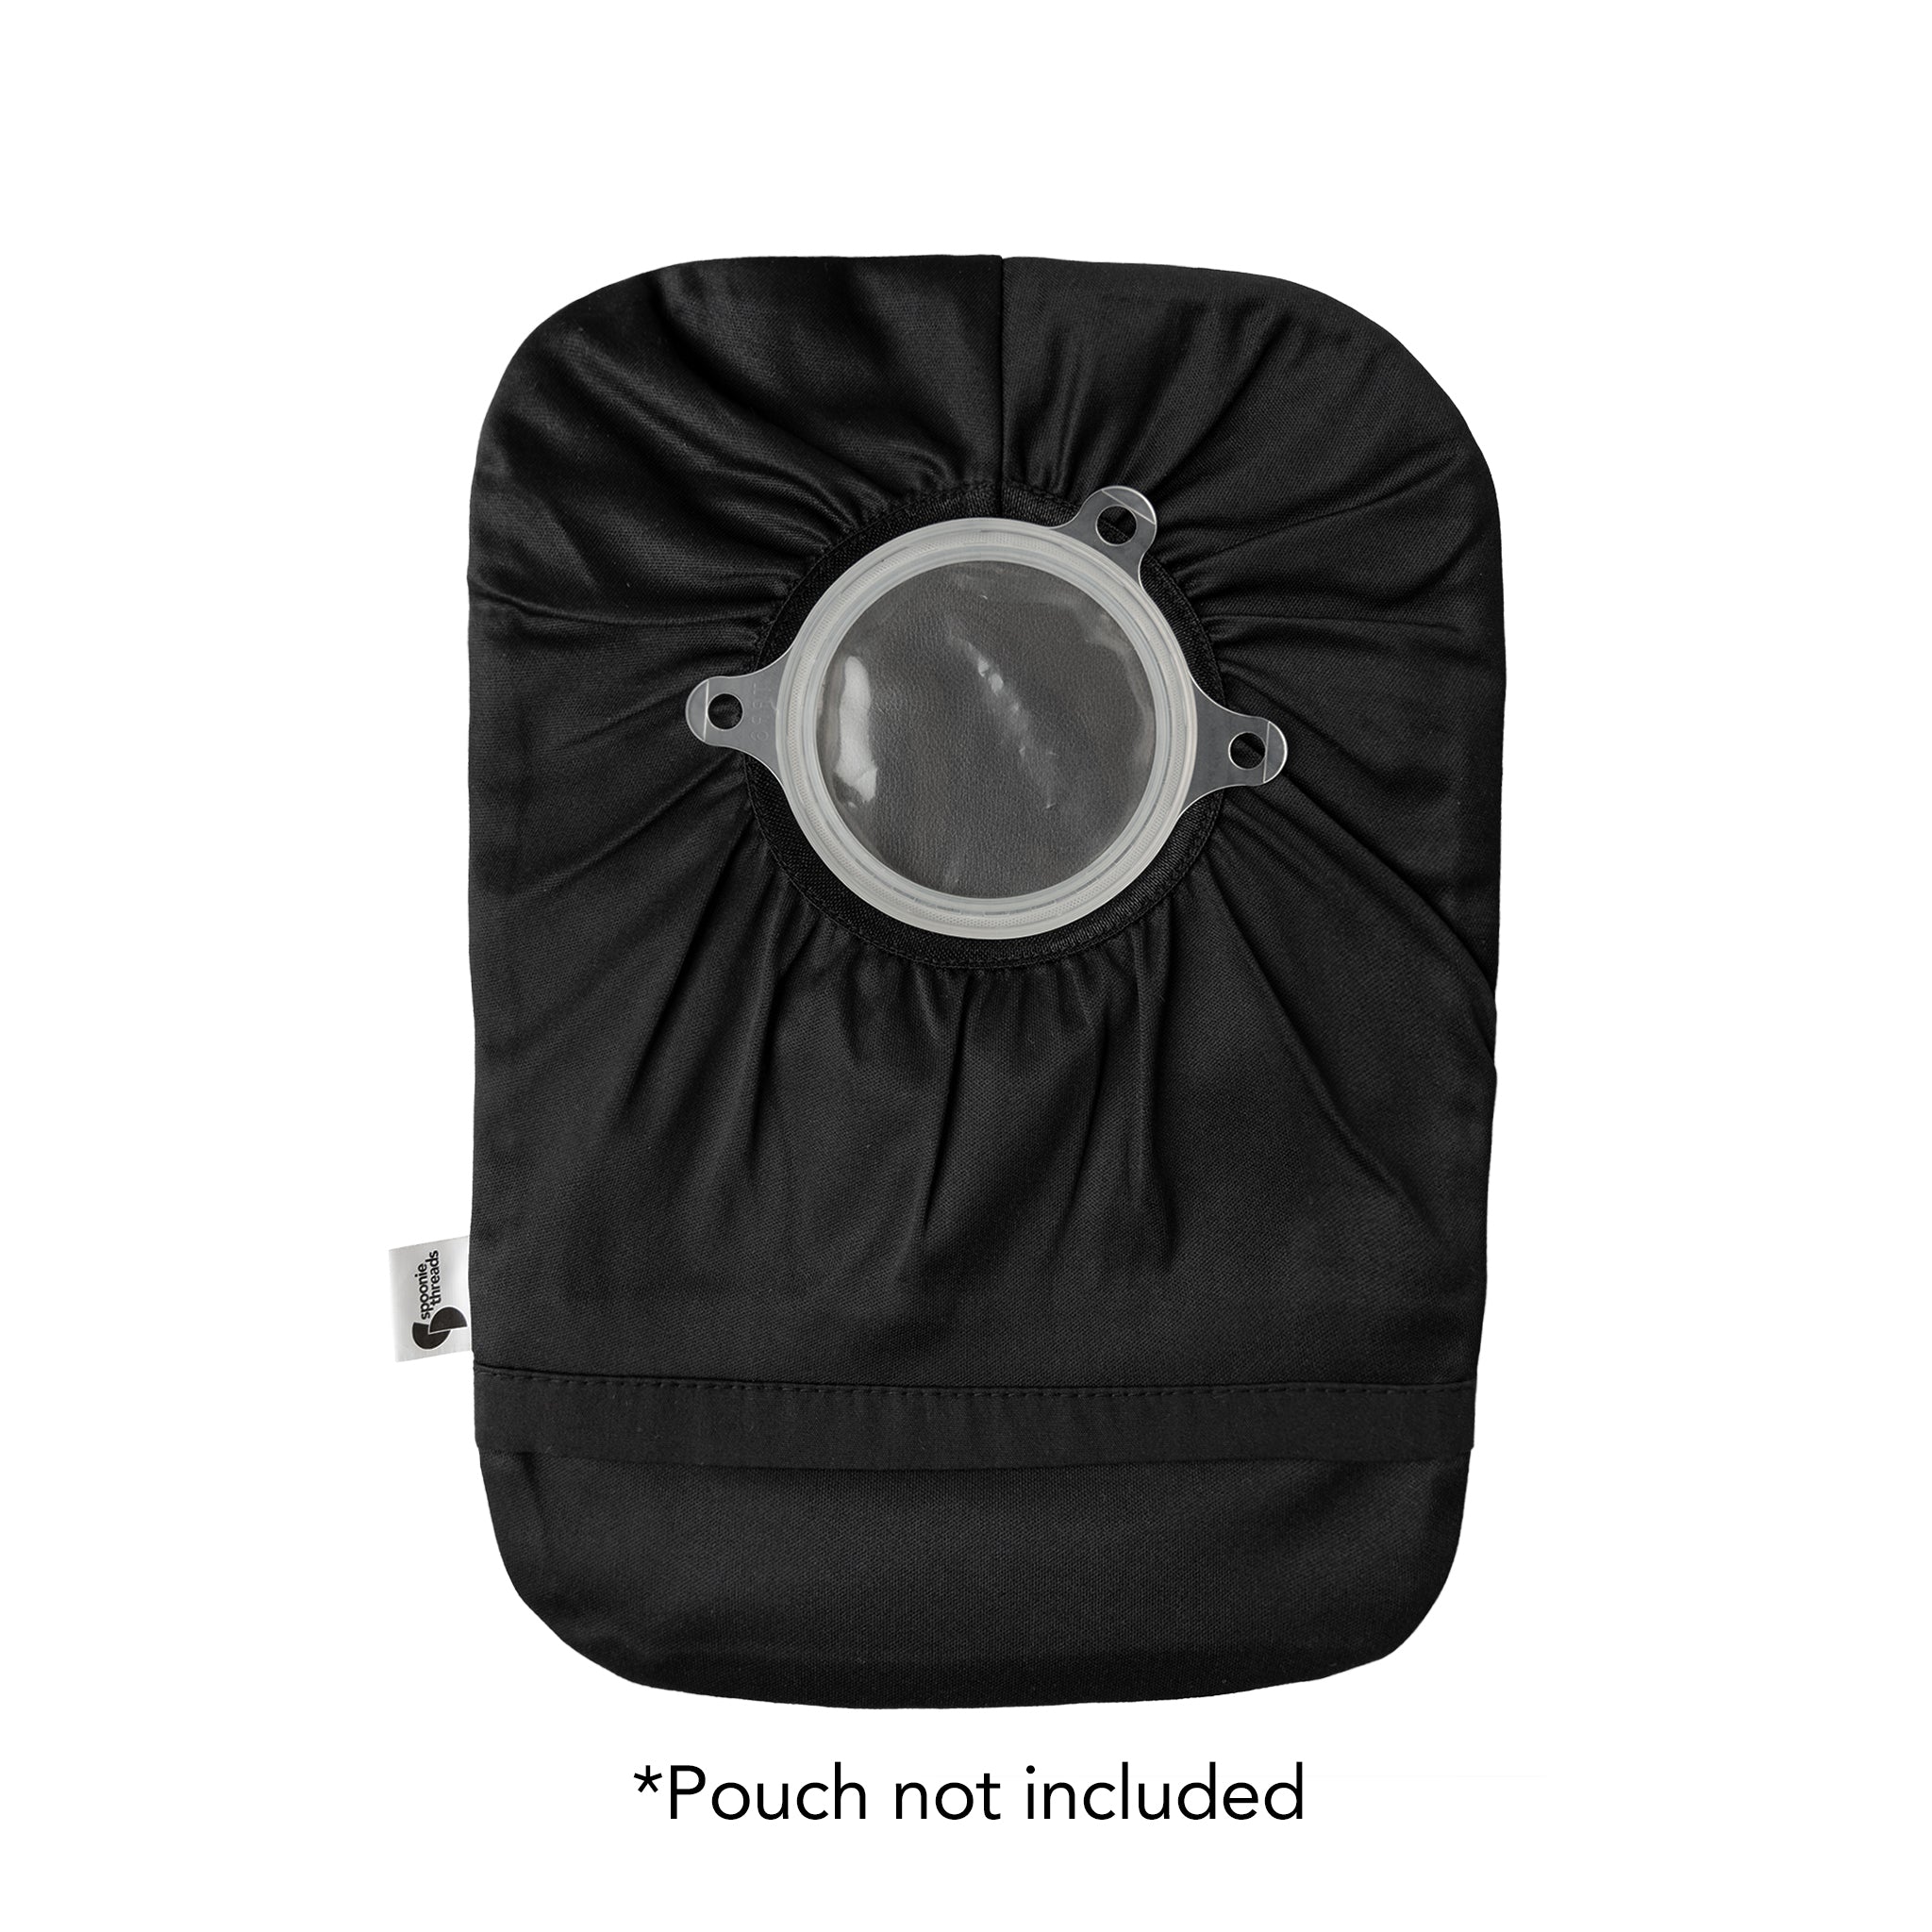 Black &quot;Get Your Shit Together&quot; Elastic Ostomy Bag Cover